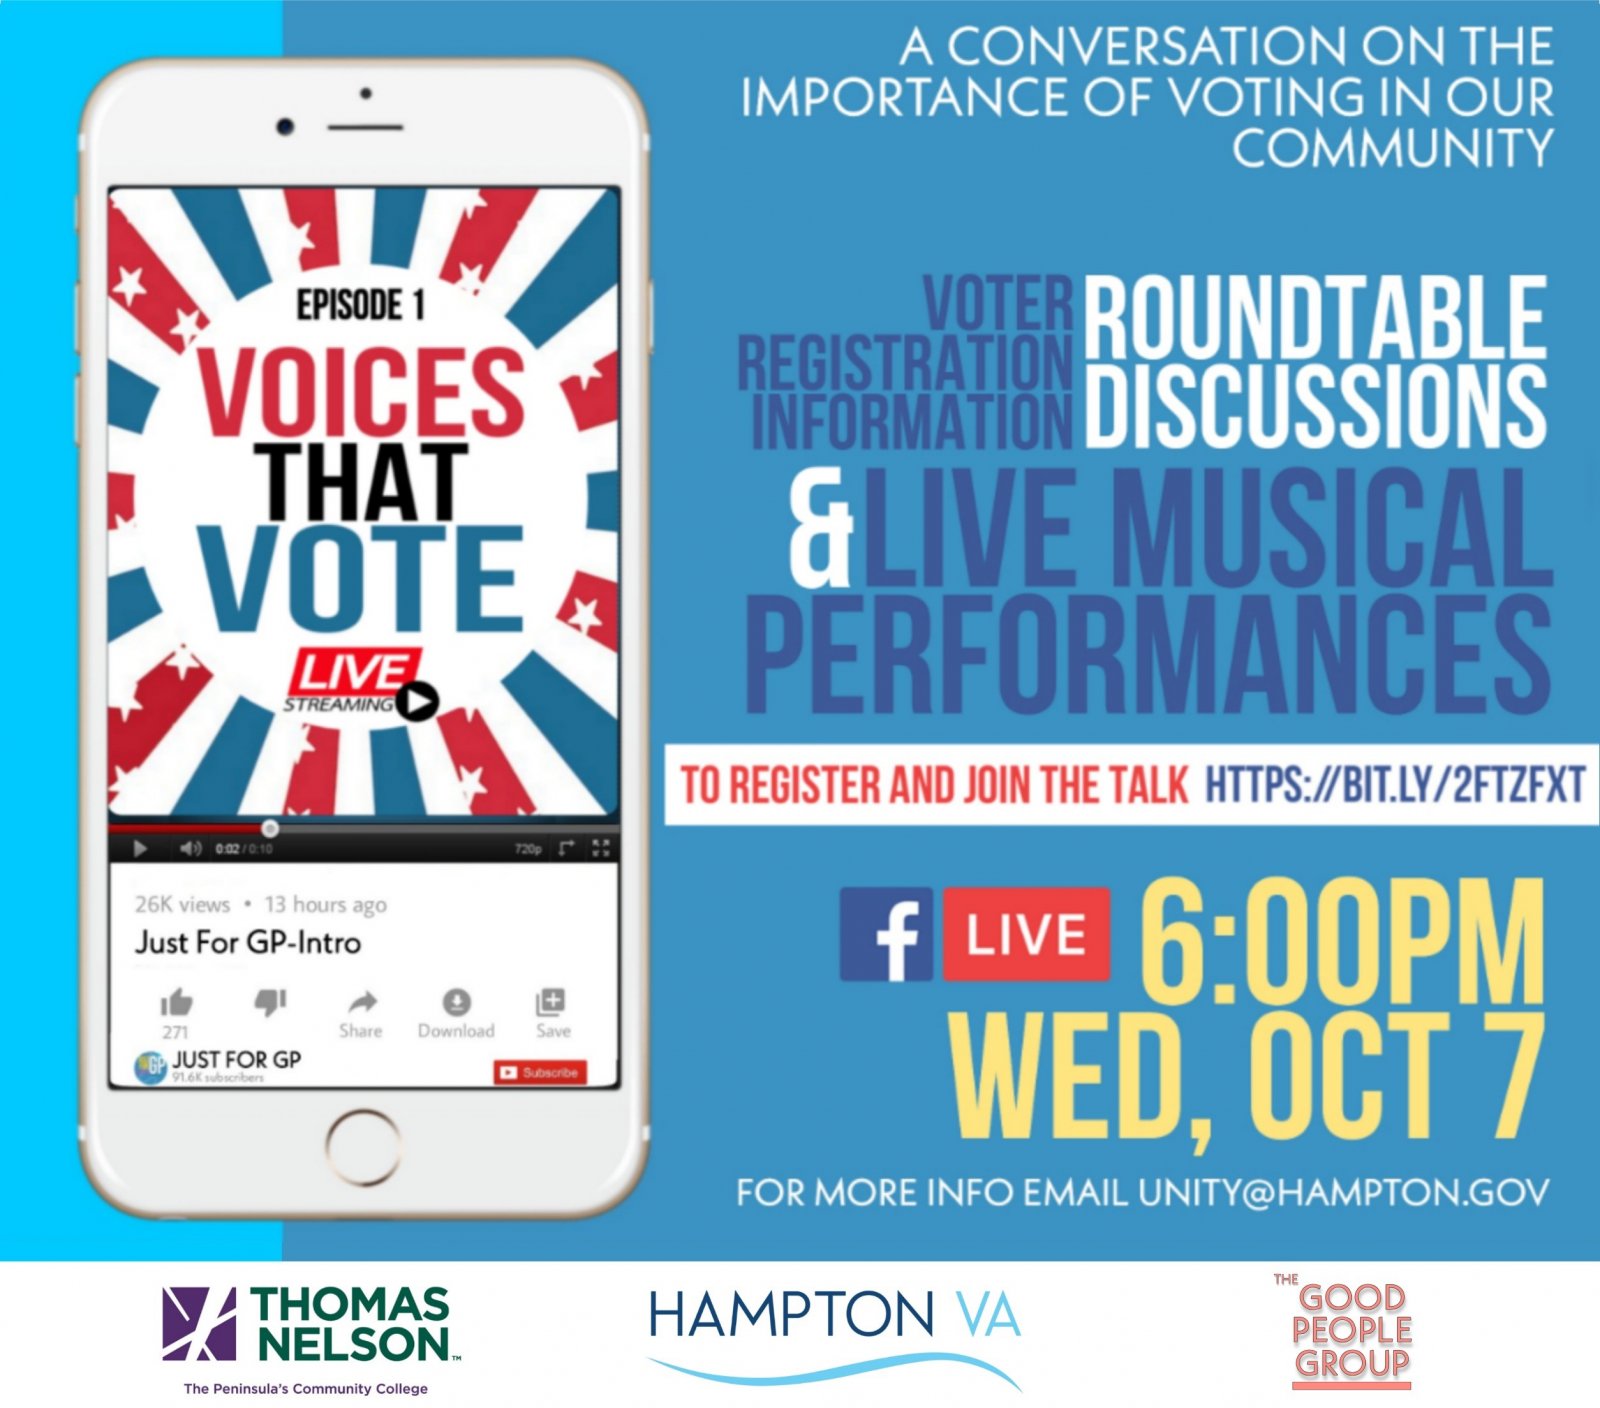 Image for Social Justice & Societal Change Committee Partners with Hampton